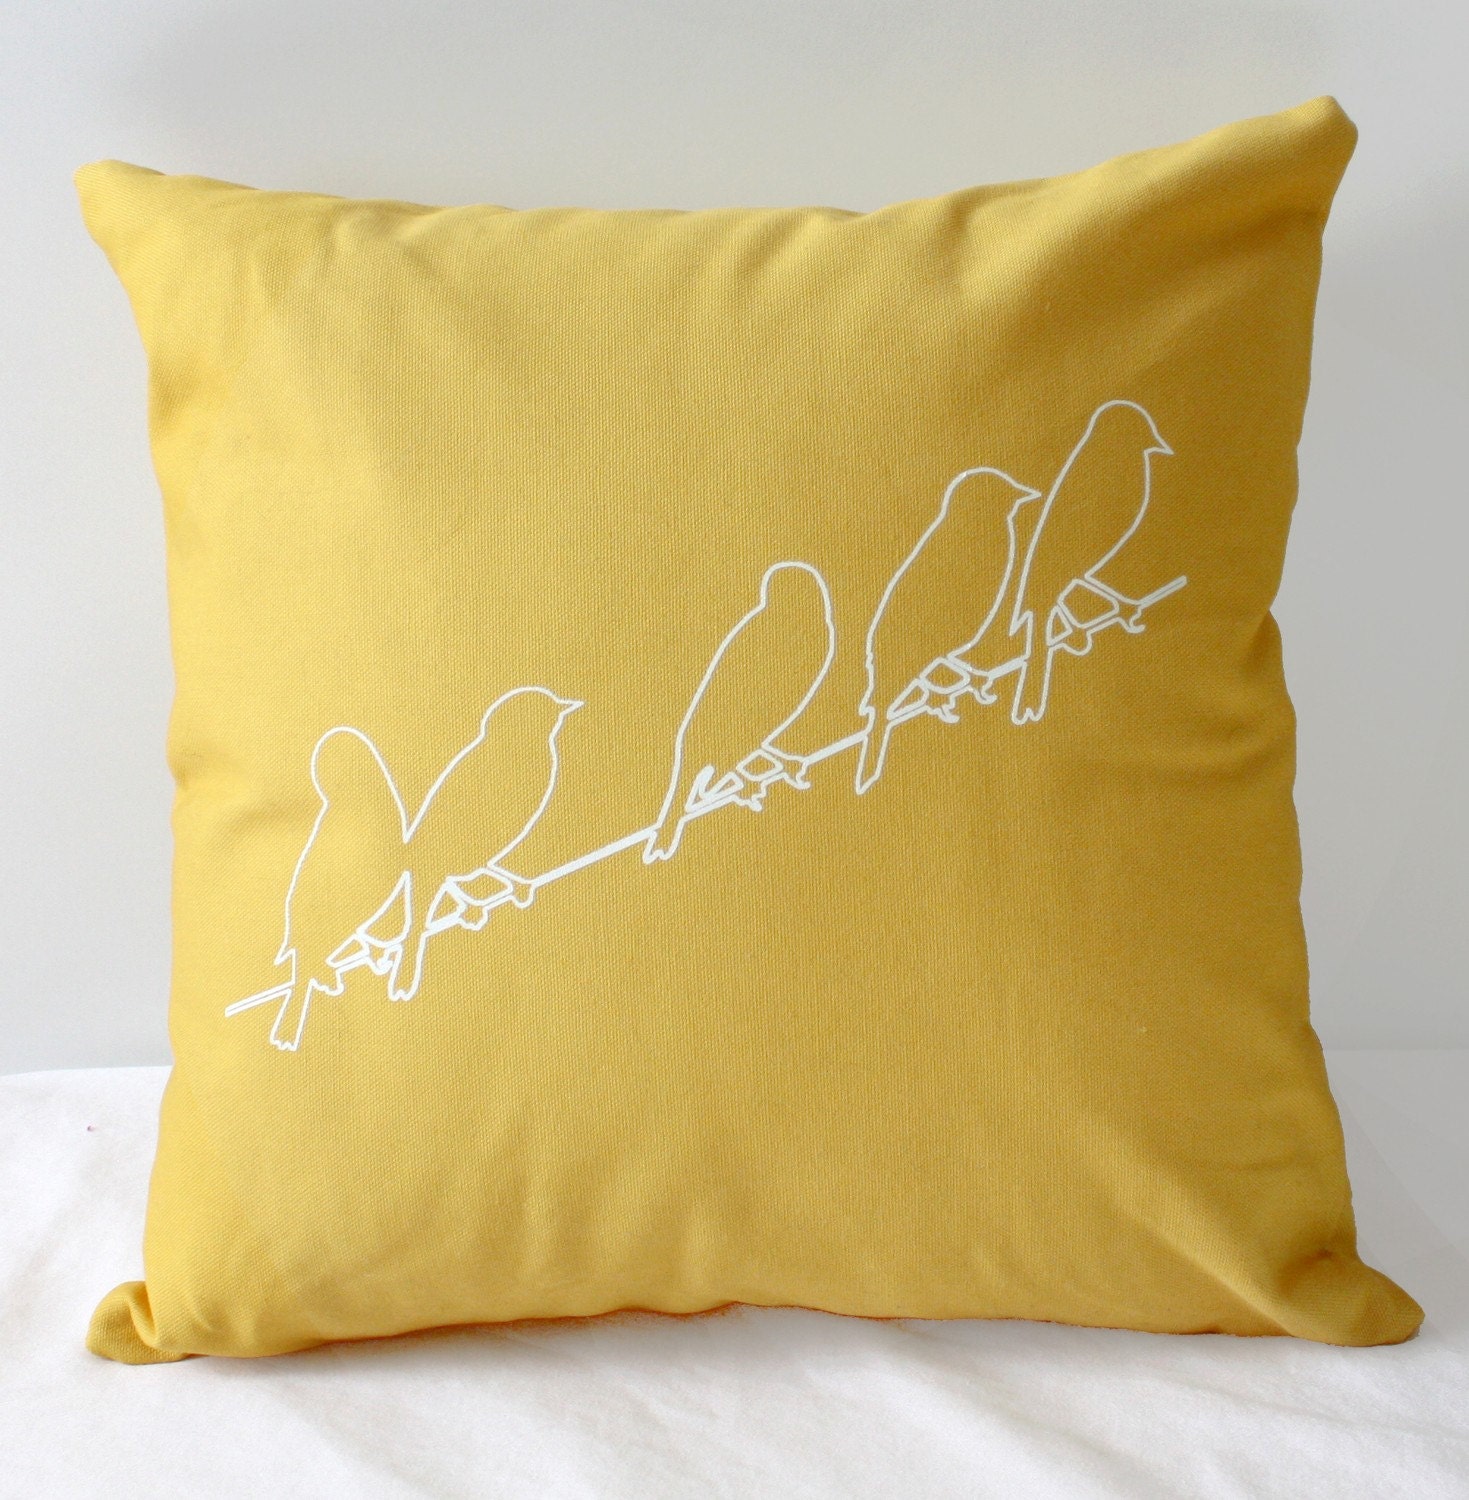 16 in. Square Throw Pillow - Sunshine Yellow with Birds on a Wire print - wickedmint